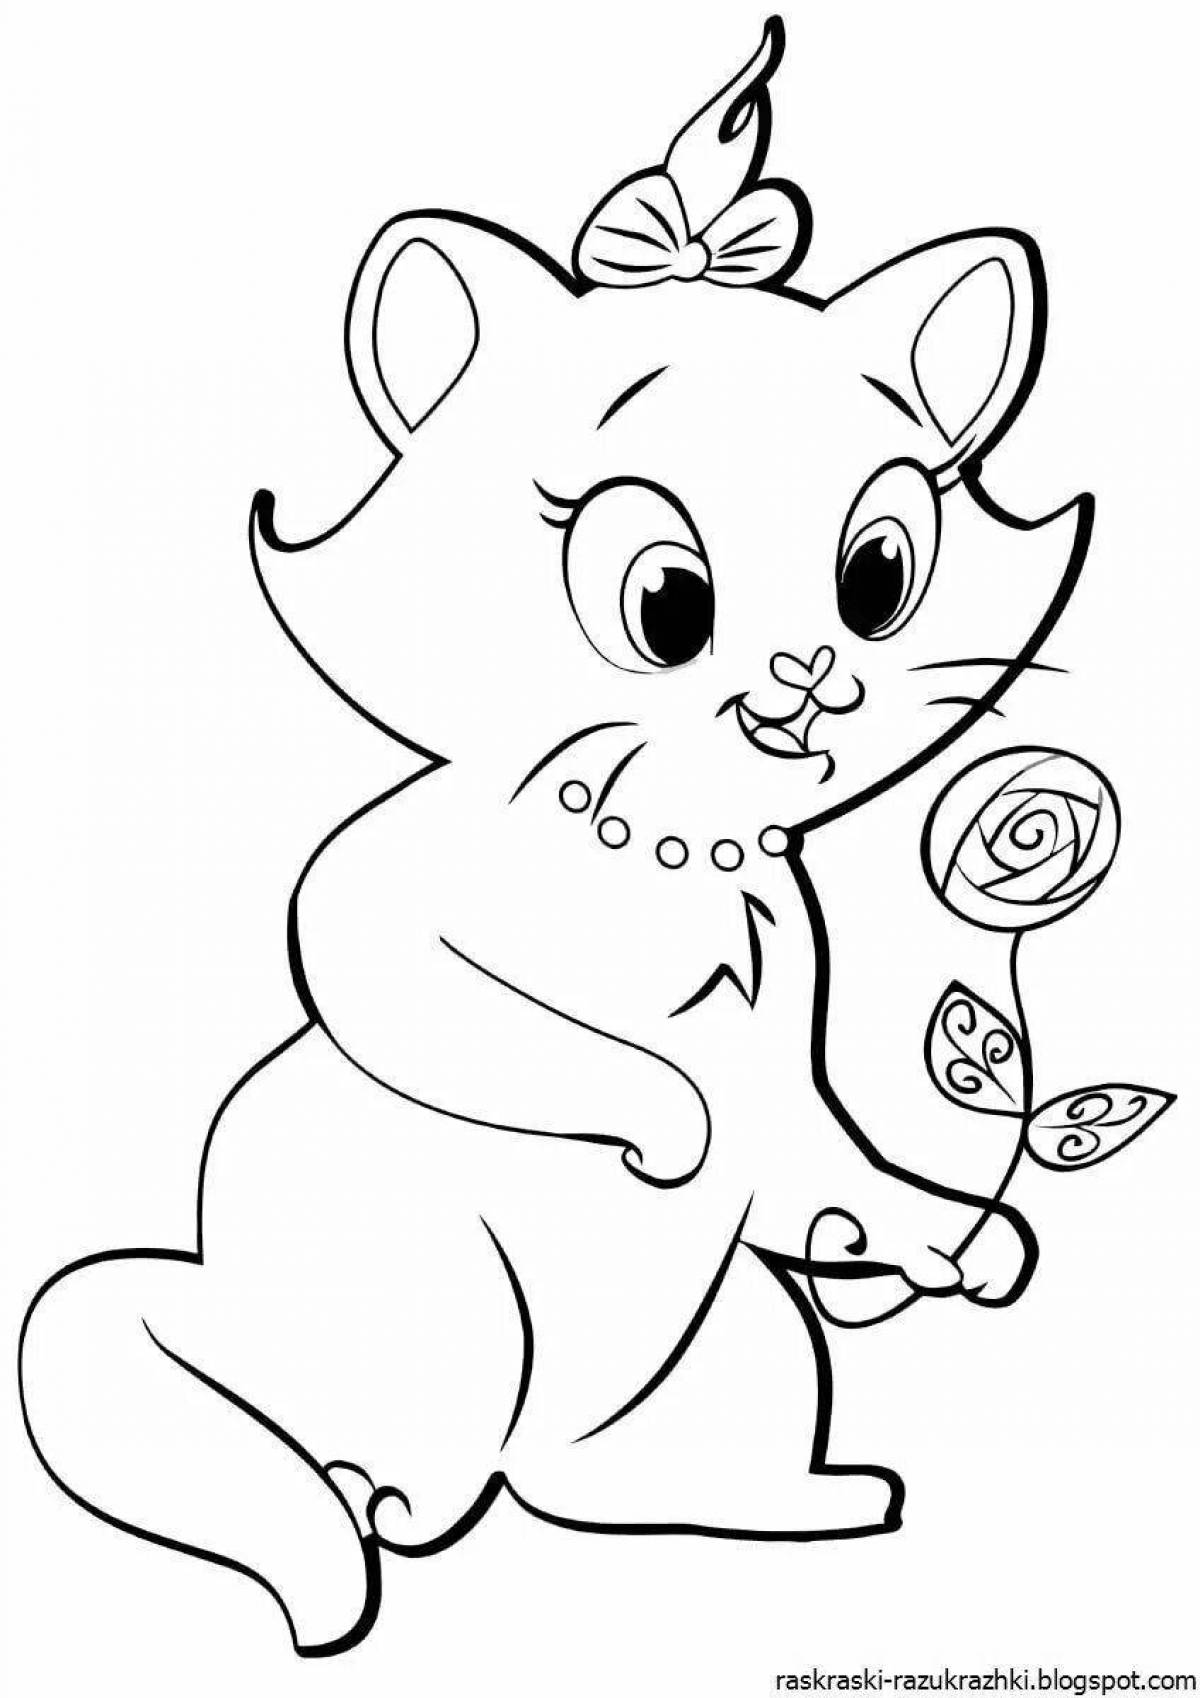 Delightful coloring book for children 5-6 years old with cats